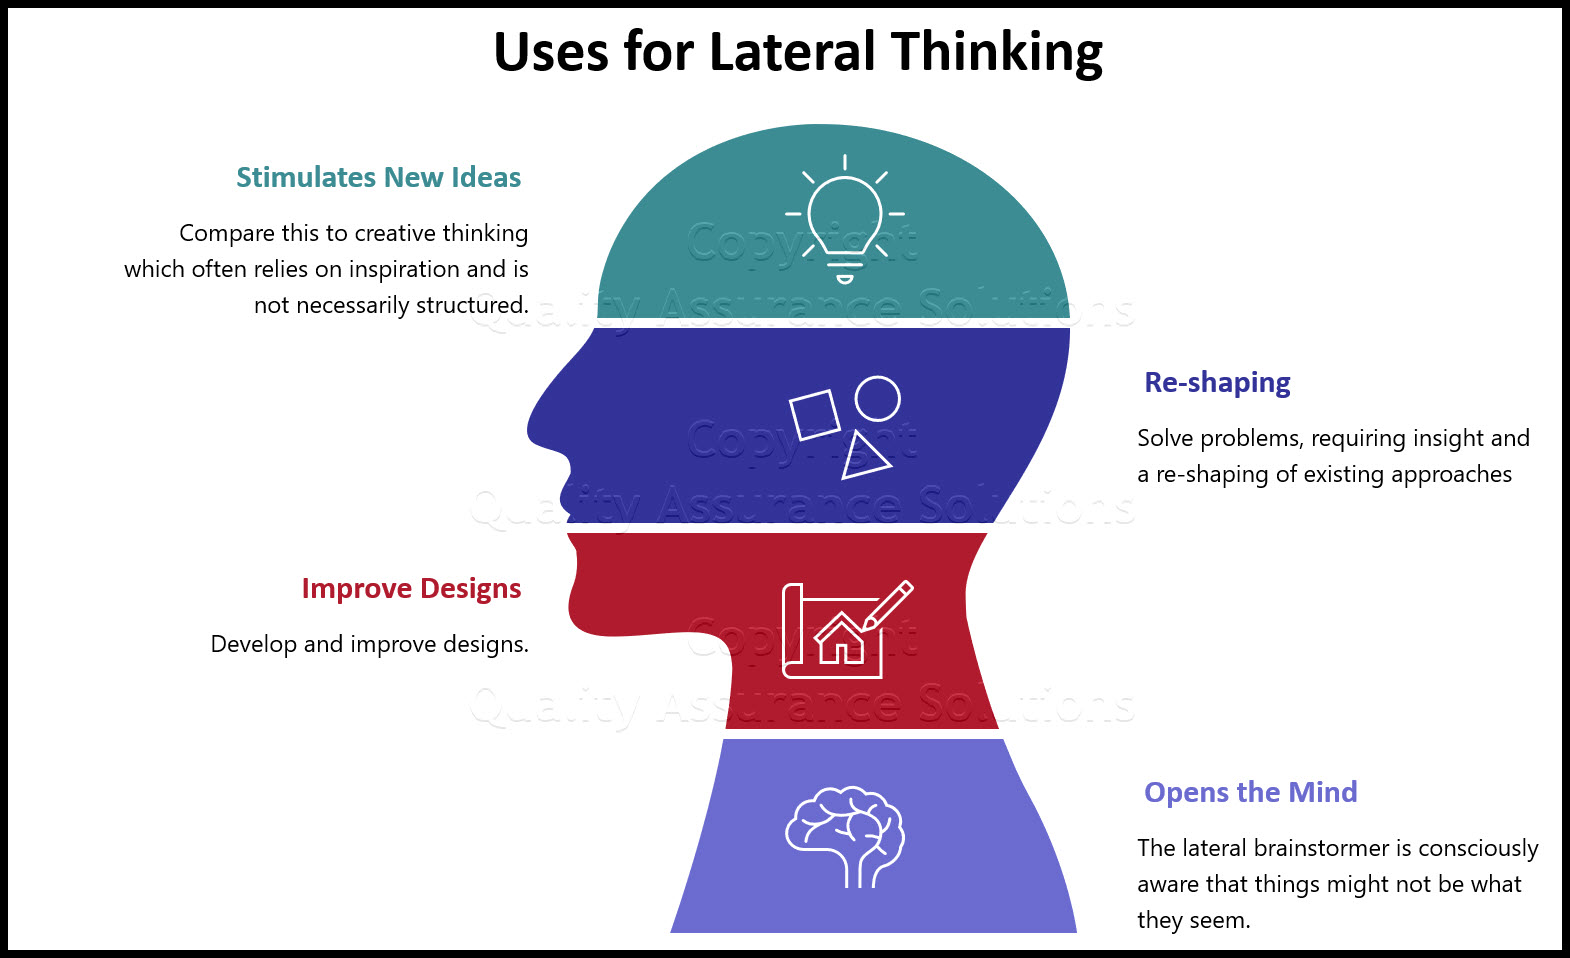 lateral thinking in a problem solving process involves